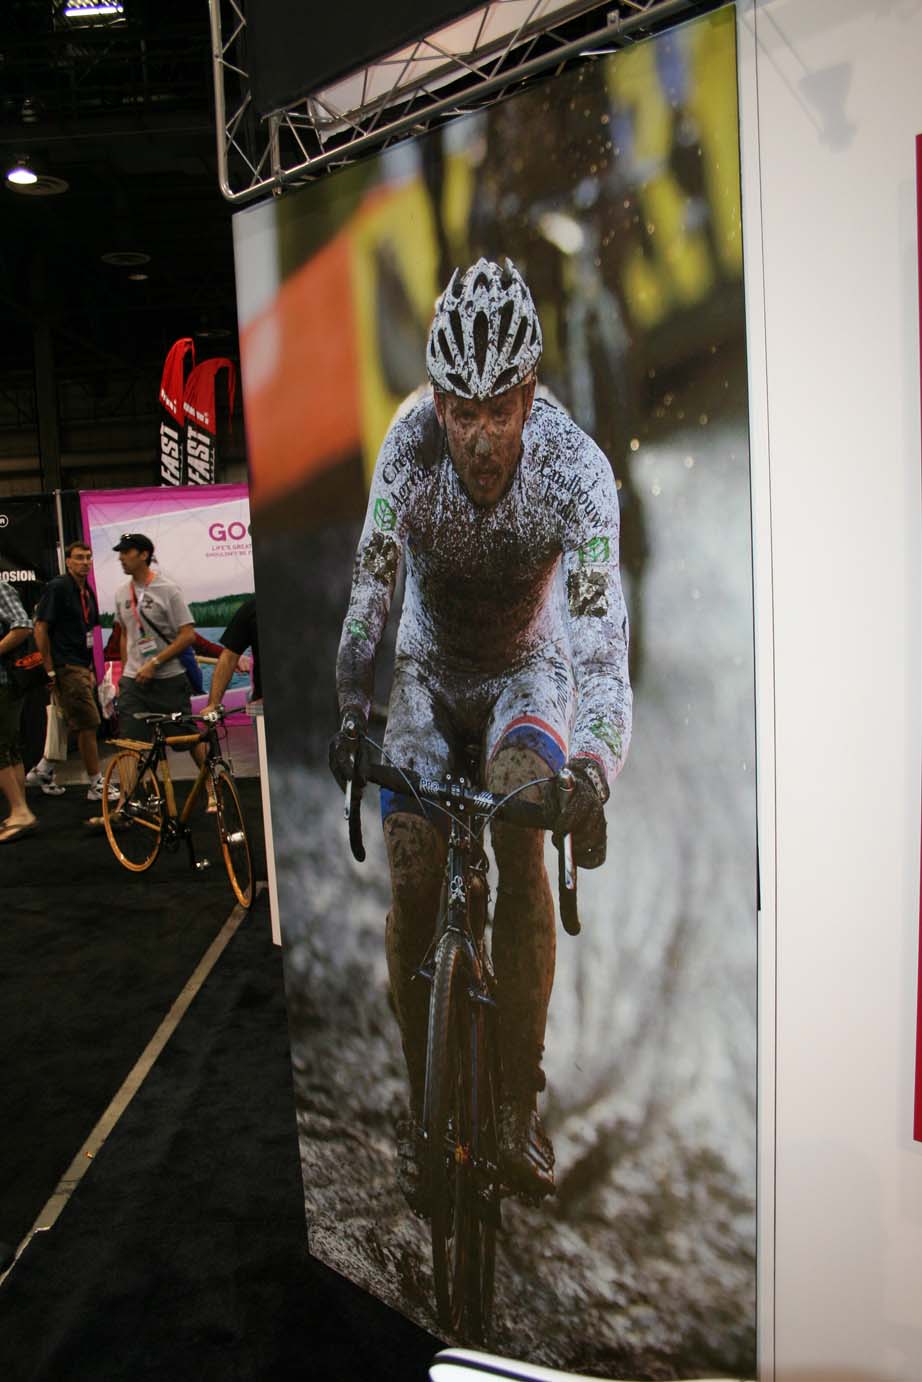 Perhaps one day he\'ll visit Interbike and CrossVegas, but for no